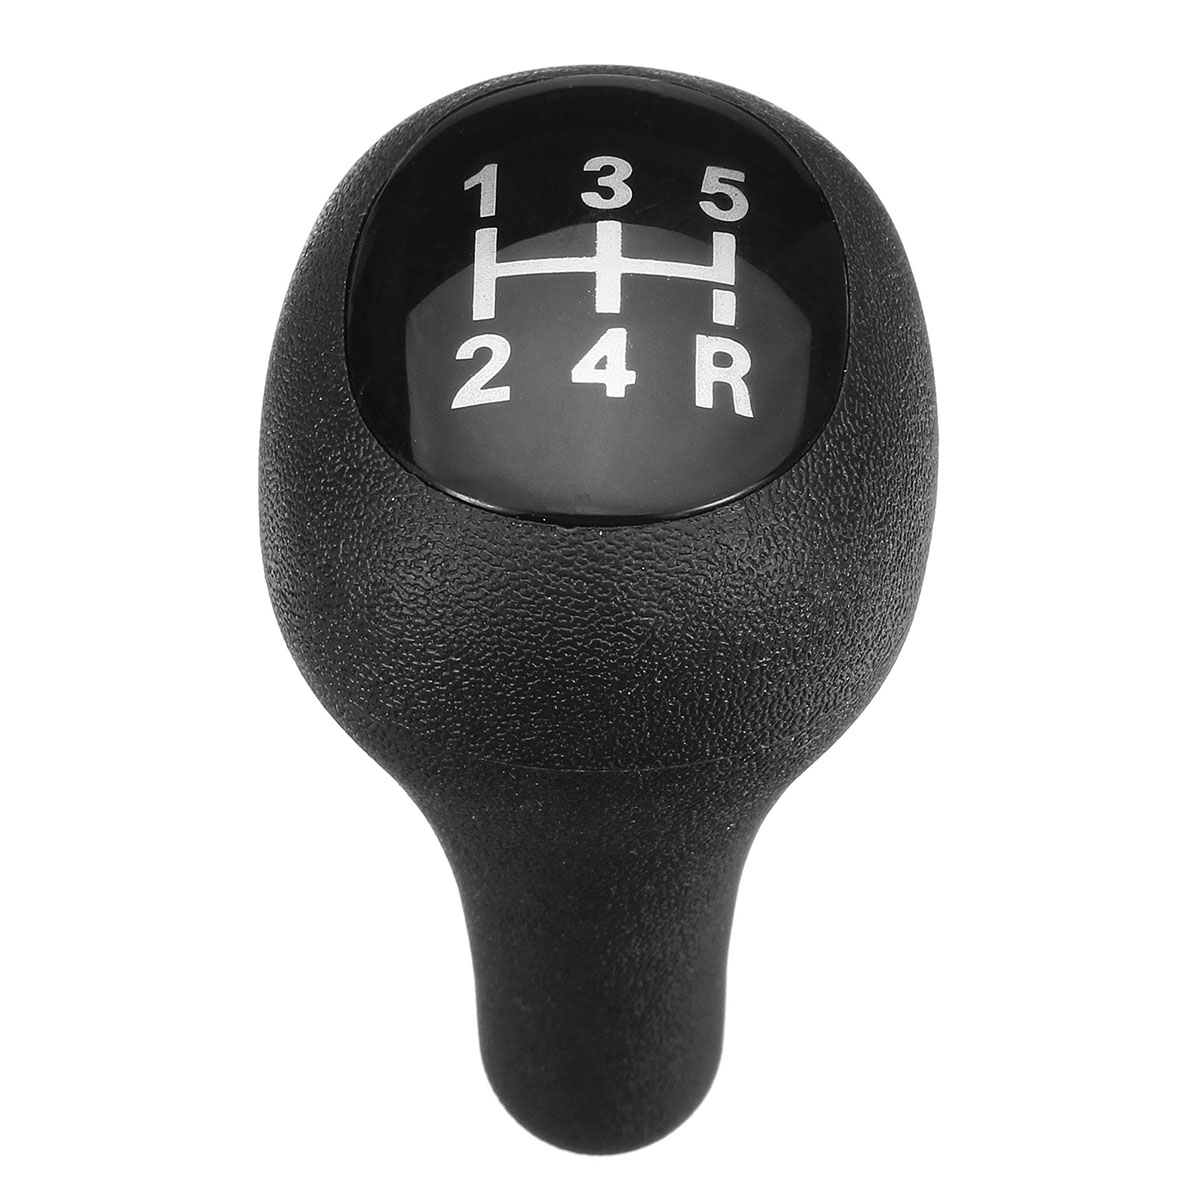 5 6 Speed Plastic Lever Stick Gear Shift Knob for Ford Focus MK1 1998-2005